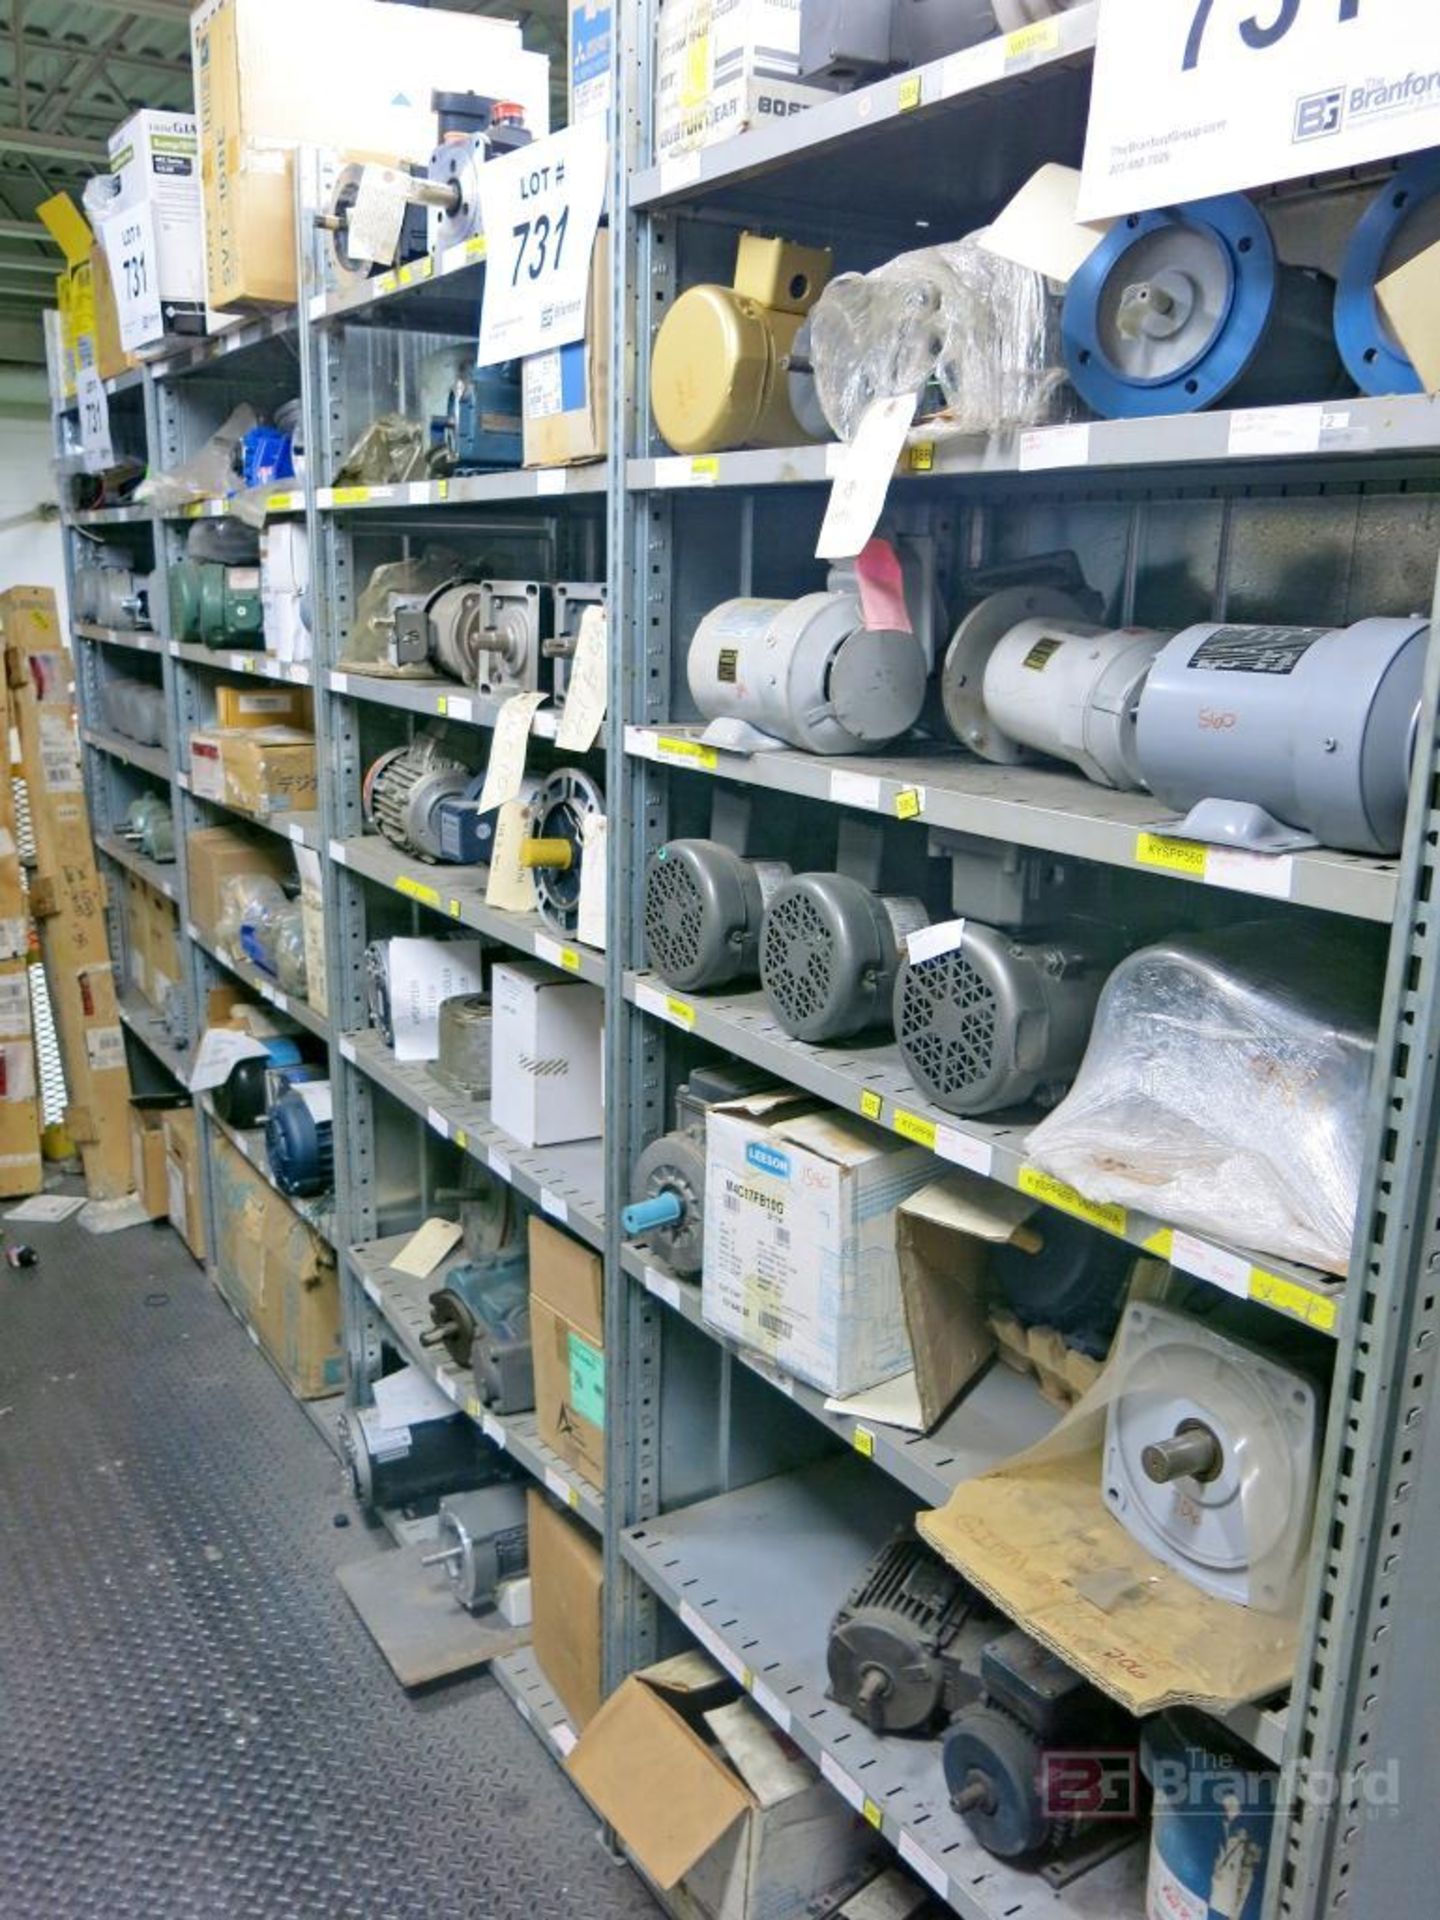 (4) Sections of Schafer Racking w/ Contents